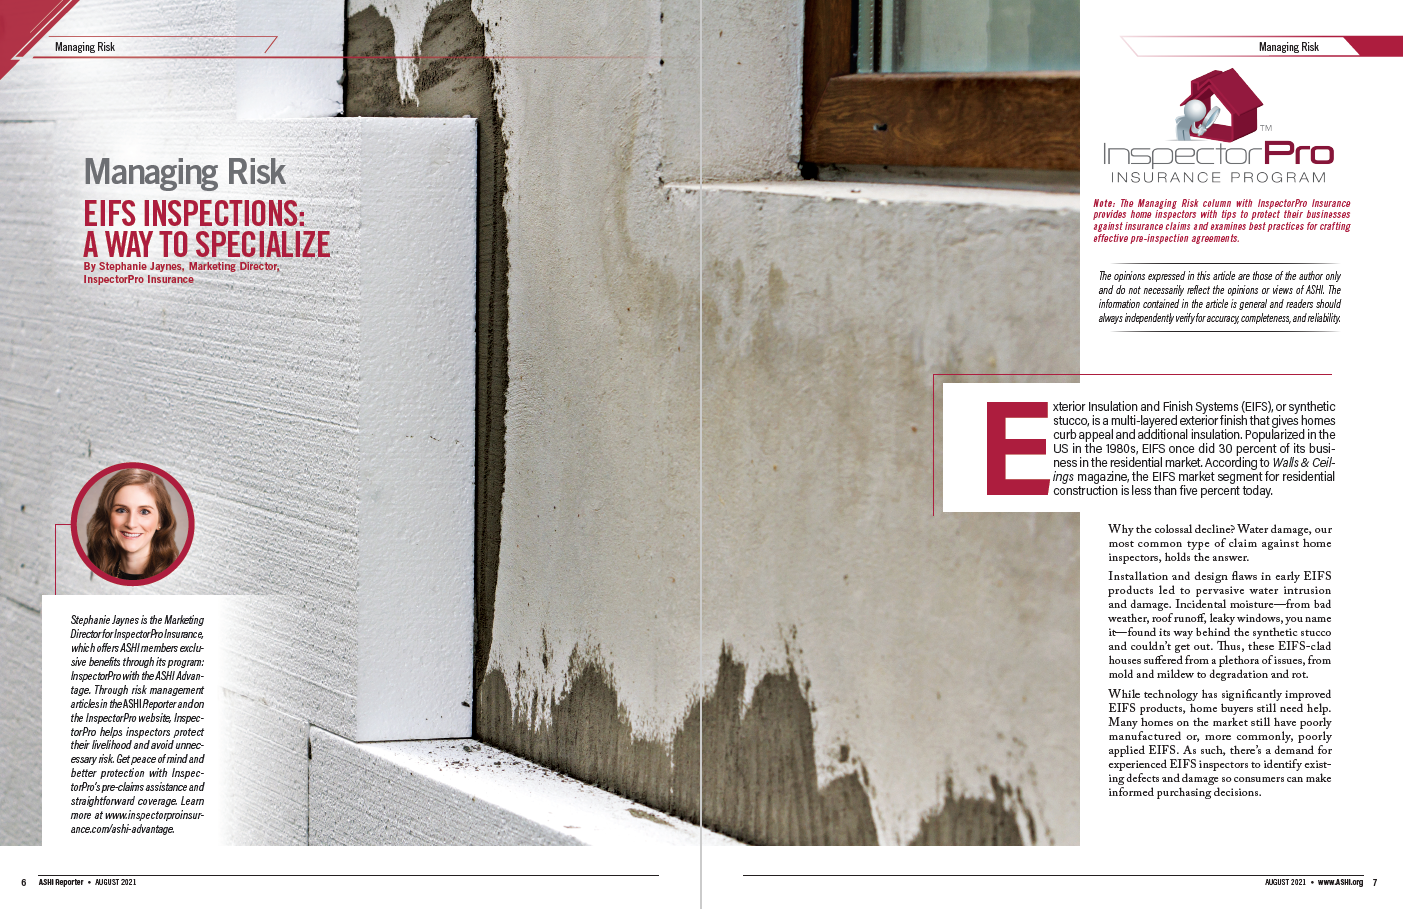 Picture of EIFS inspection article in a magazine